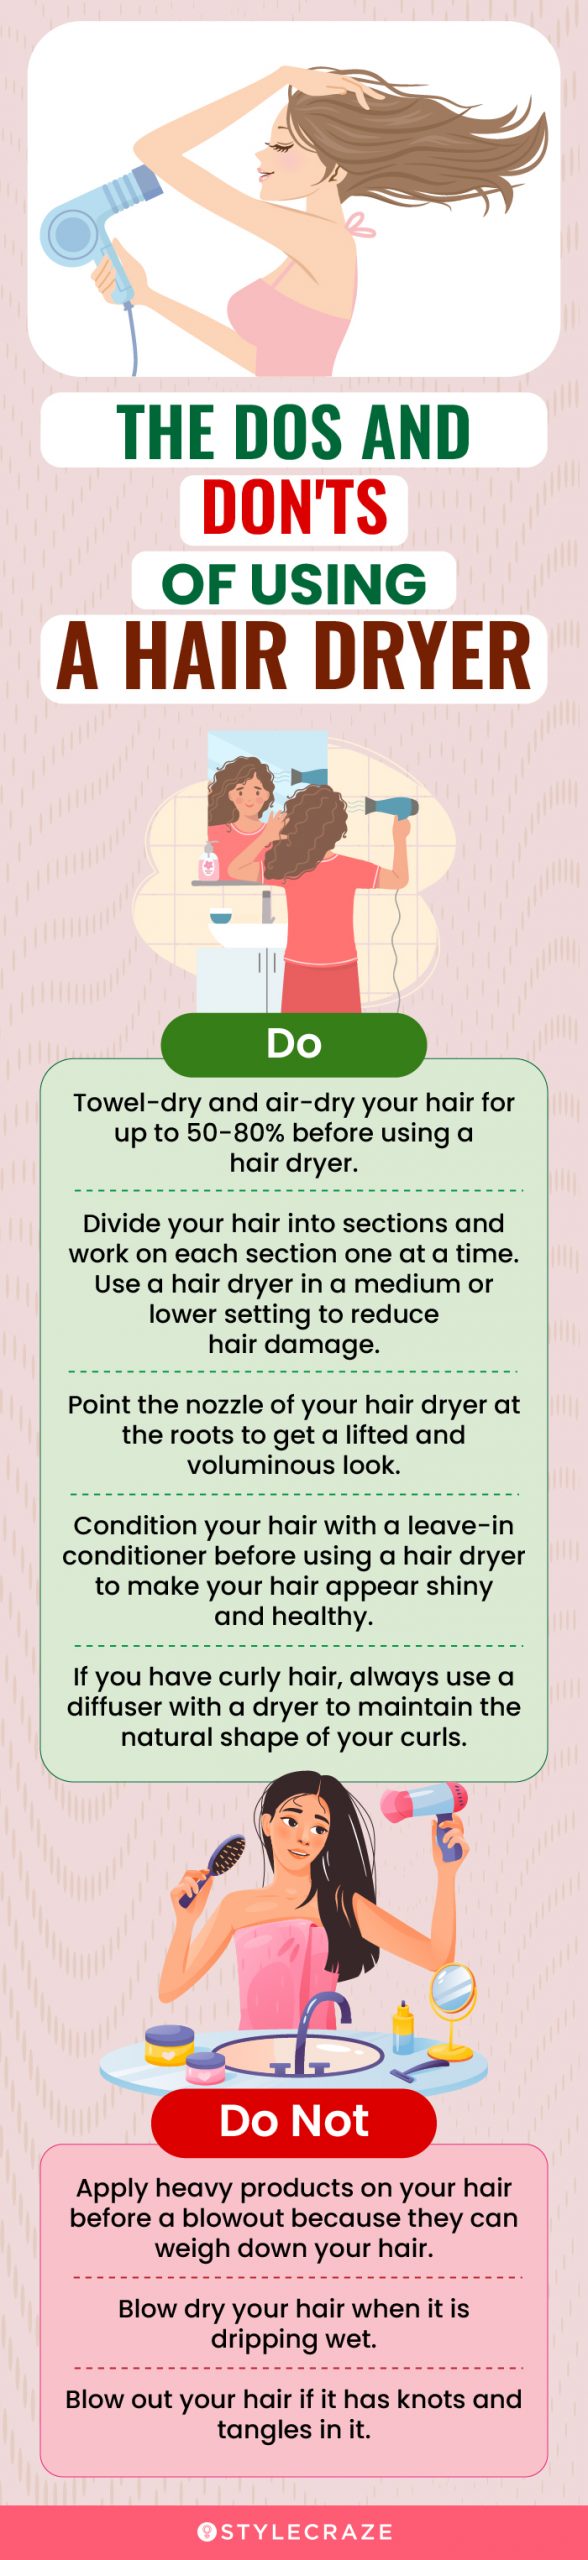 The DOs And DON'Ts Of Using A Hair Dryer